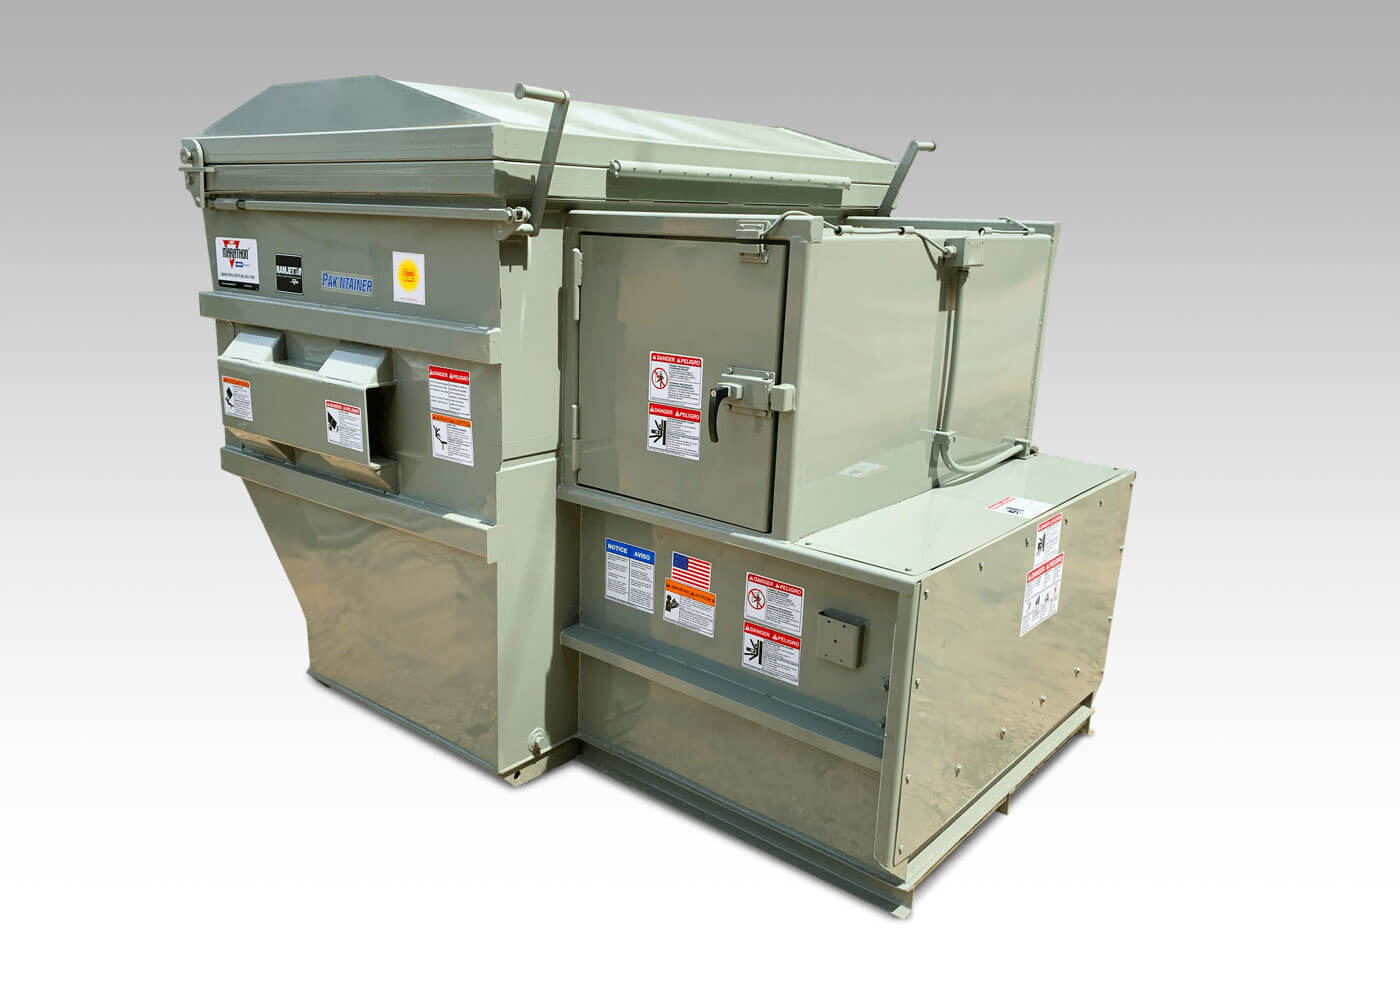 Self contained trash compactor that work with front load or rear load garbage trucks